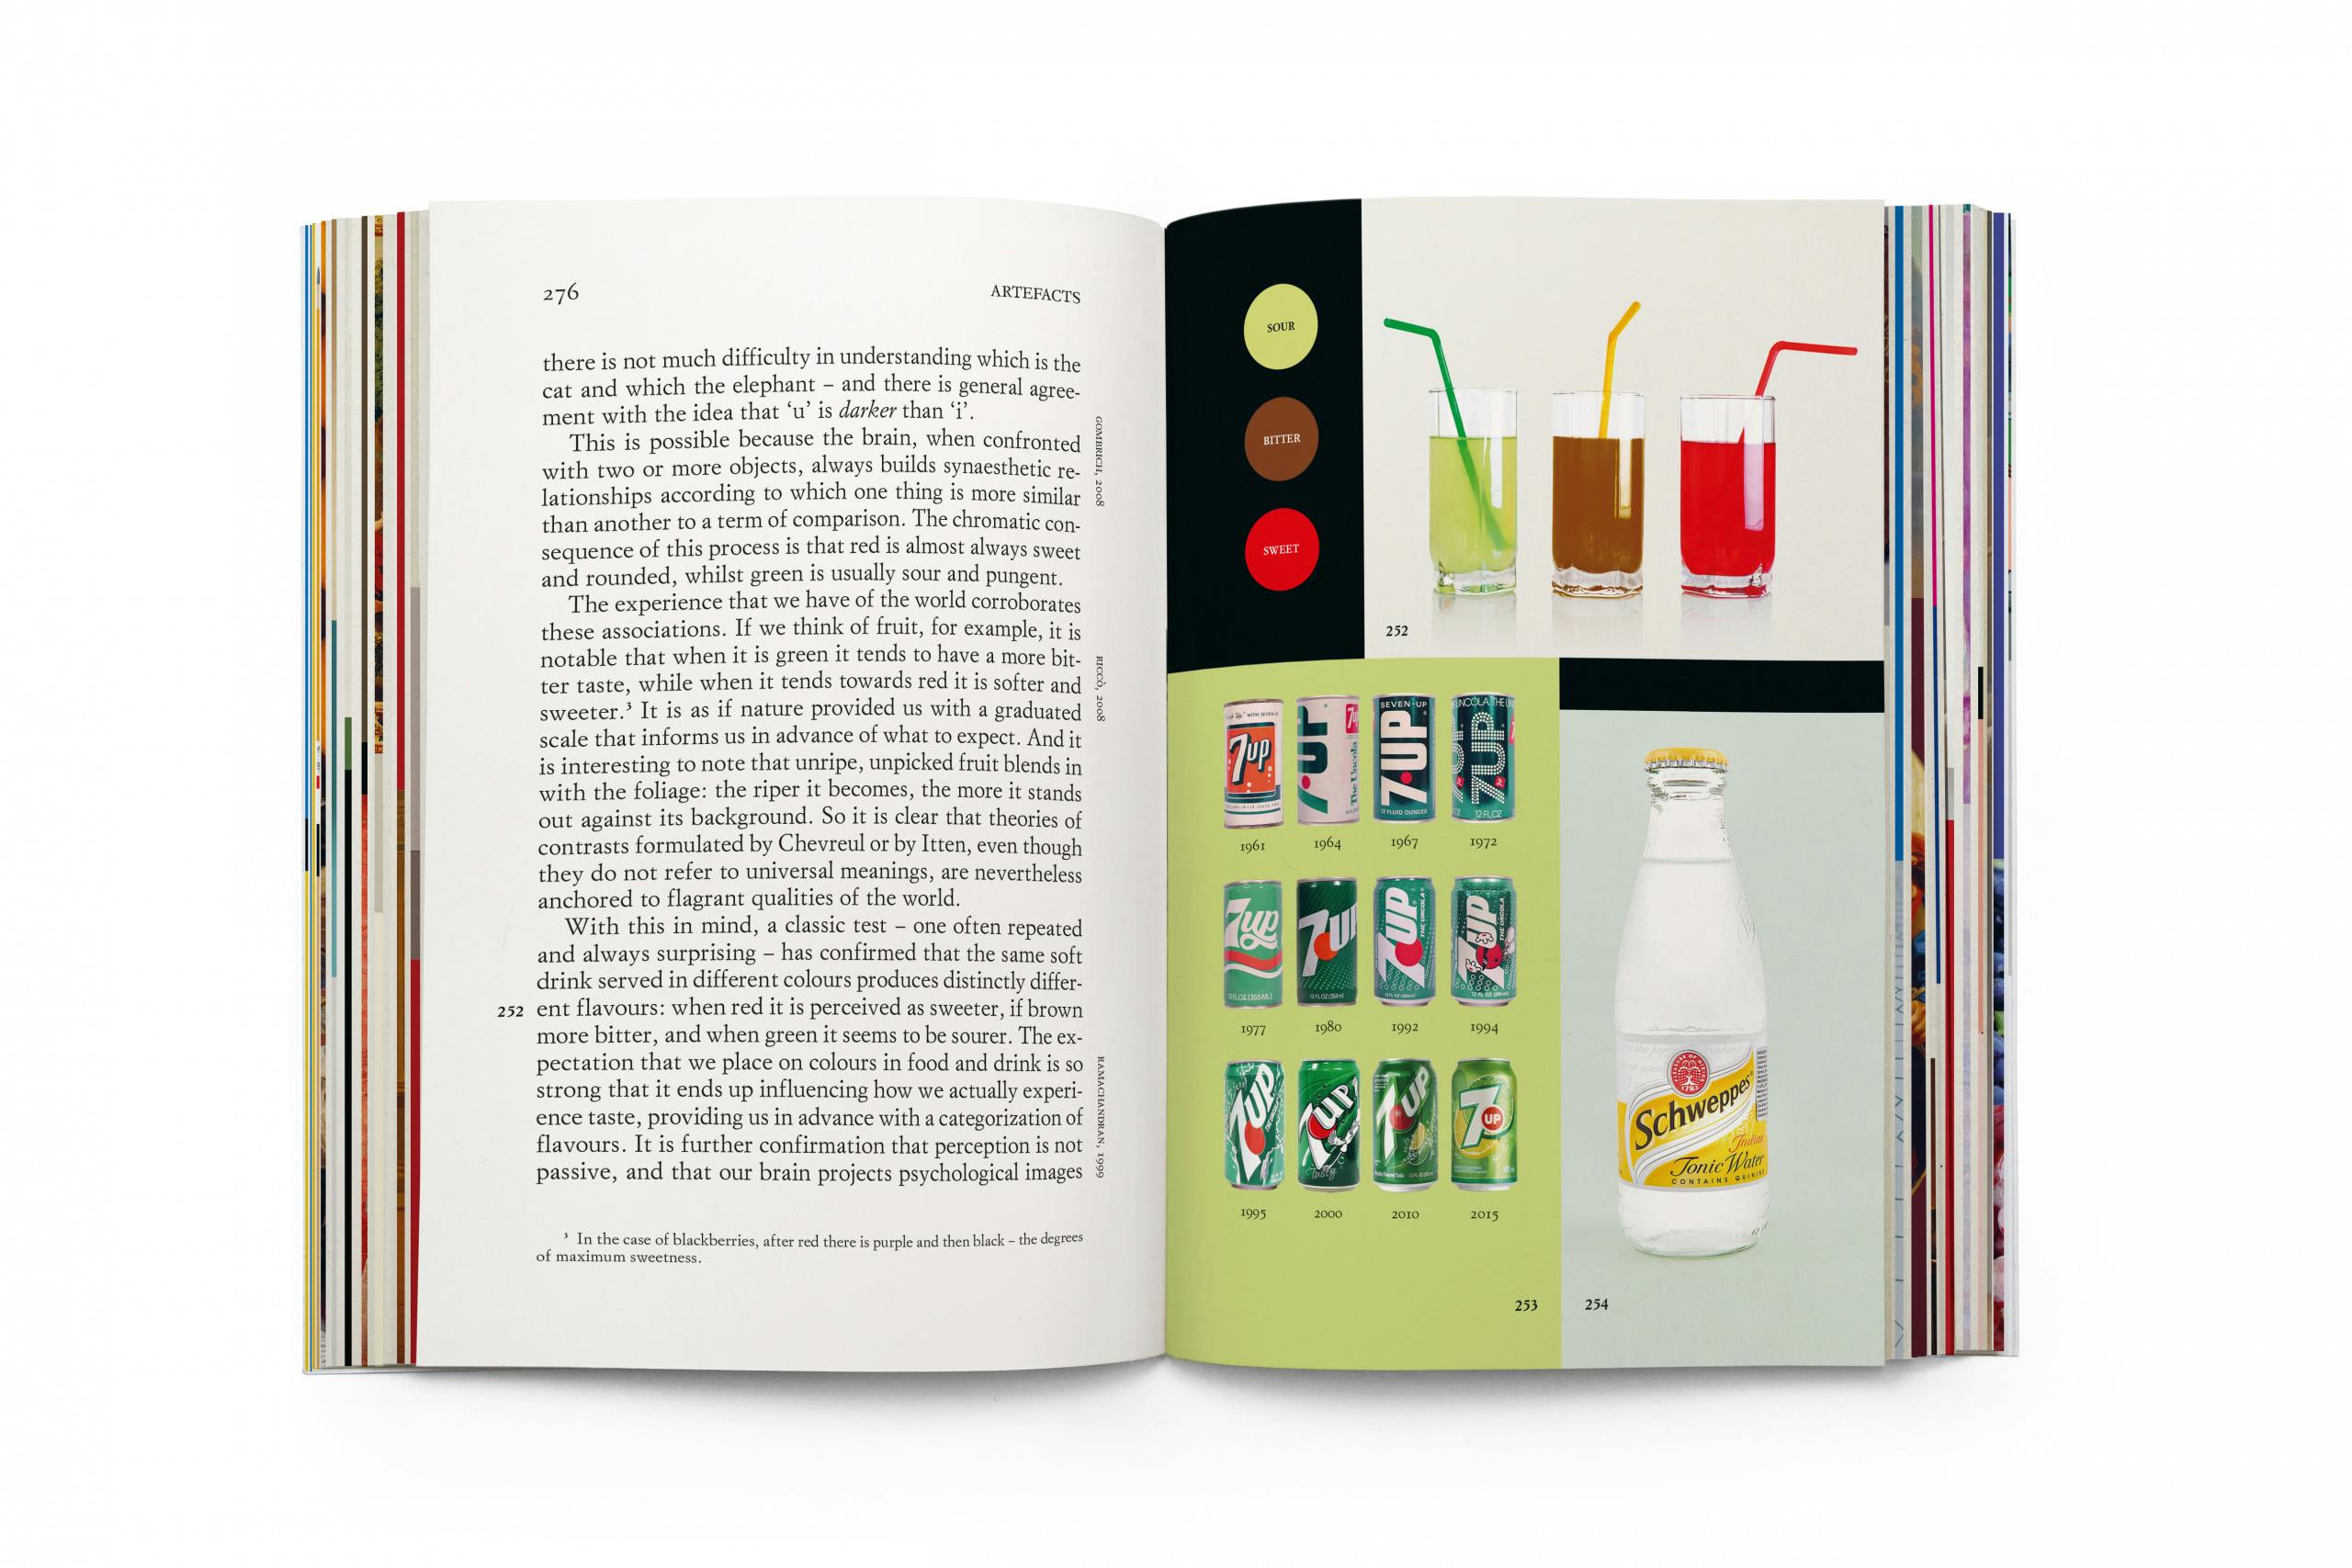 Chromorama : How Colour Changed Our Way of Seeing, Books, Tate Shop